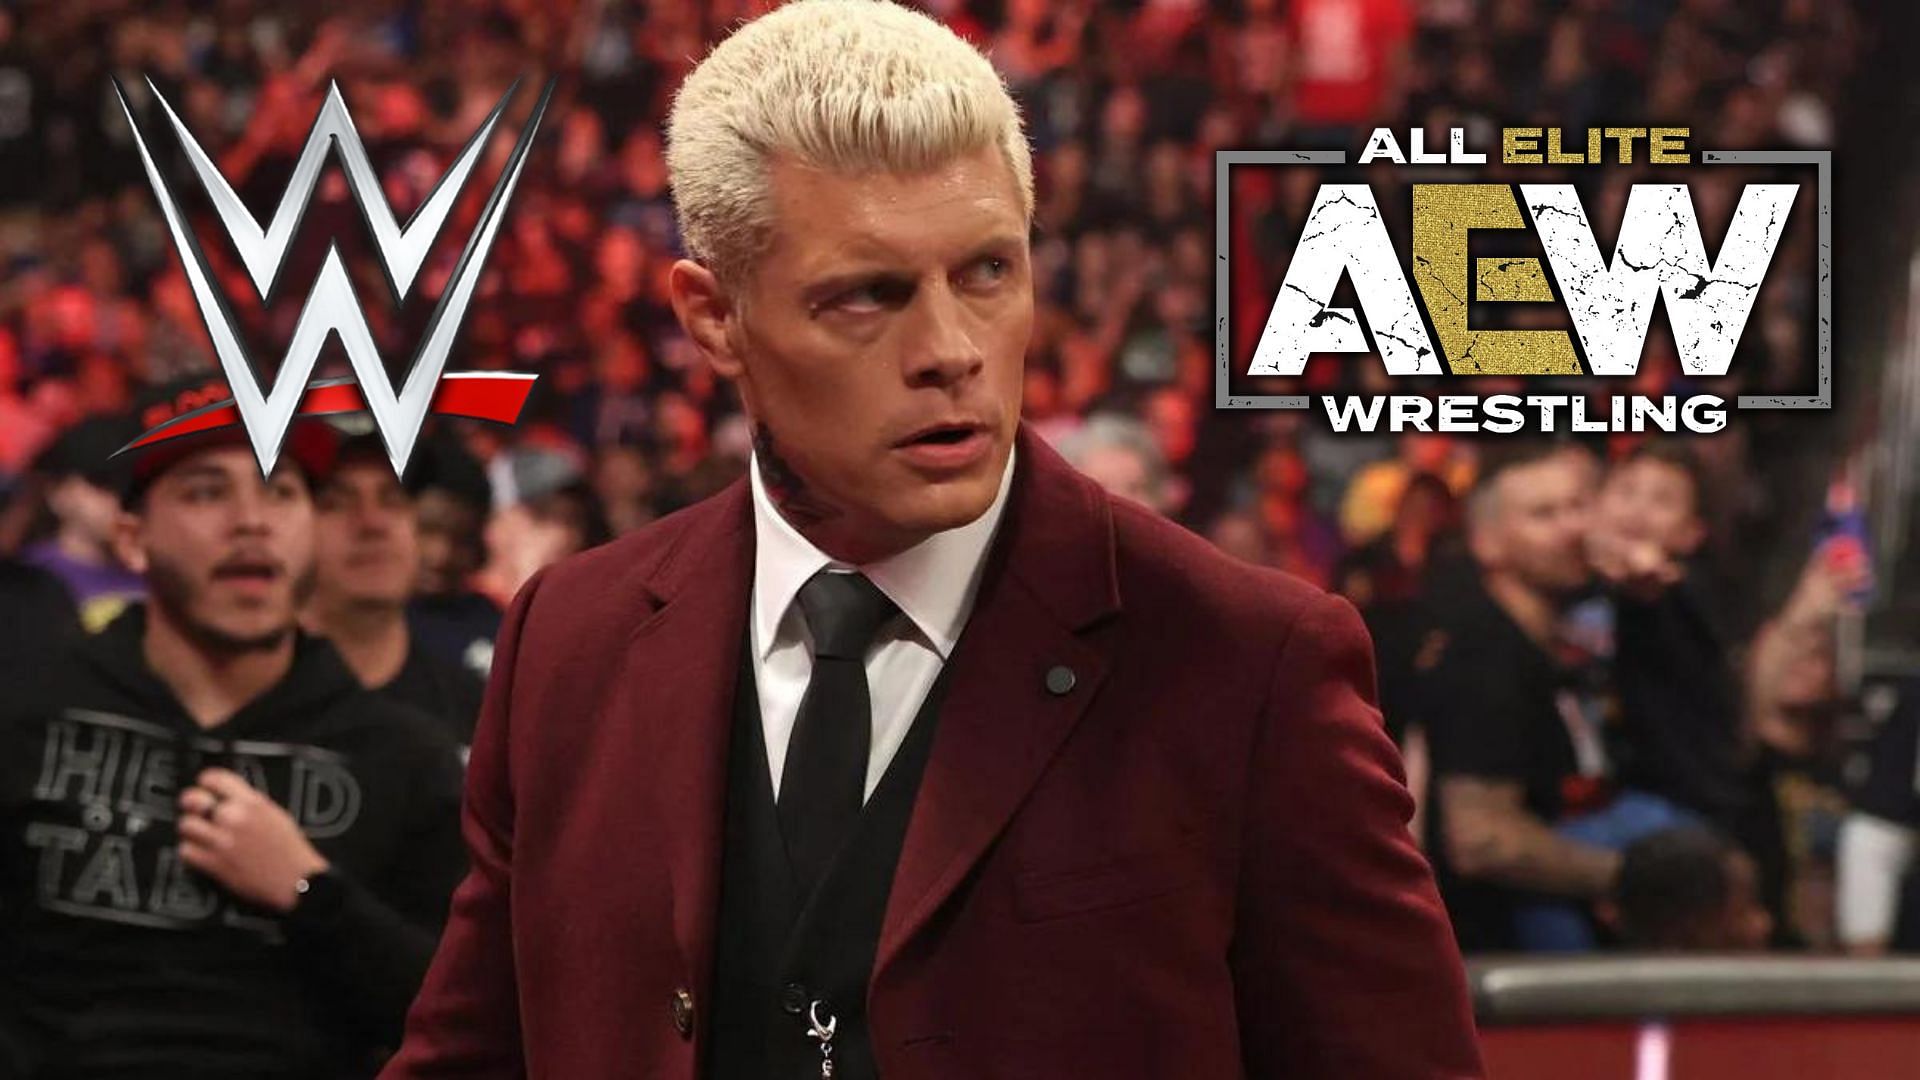 Cody Rhodes made some interesting comments this week